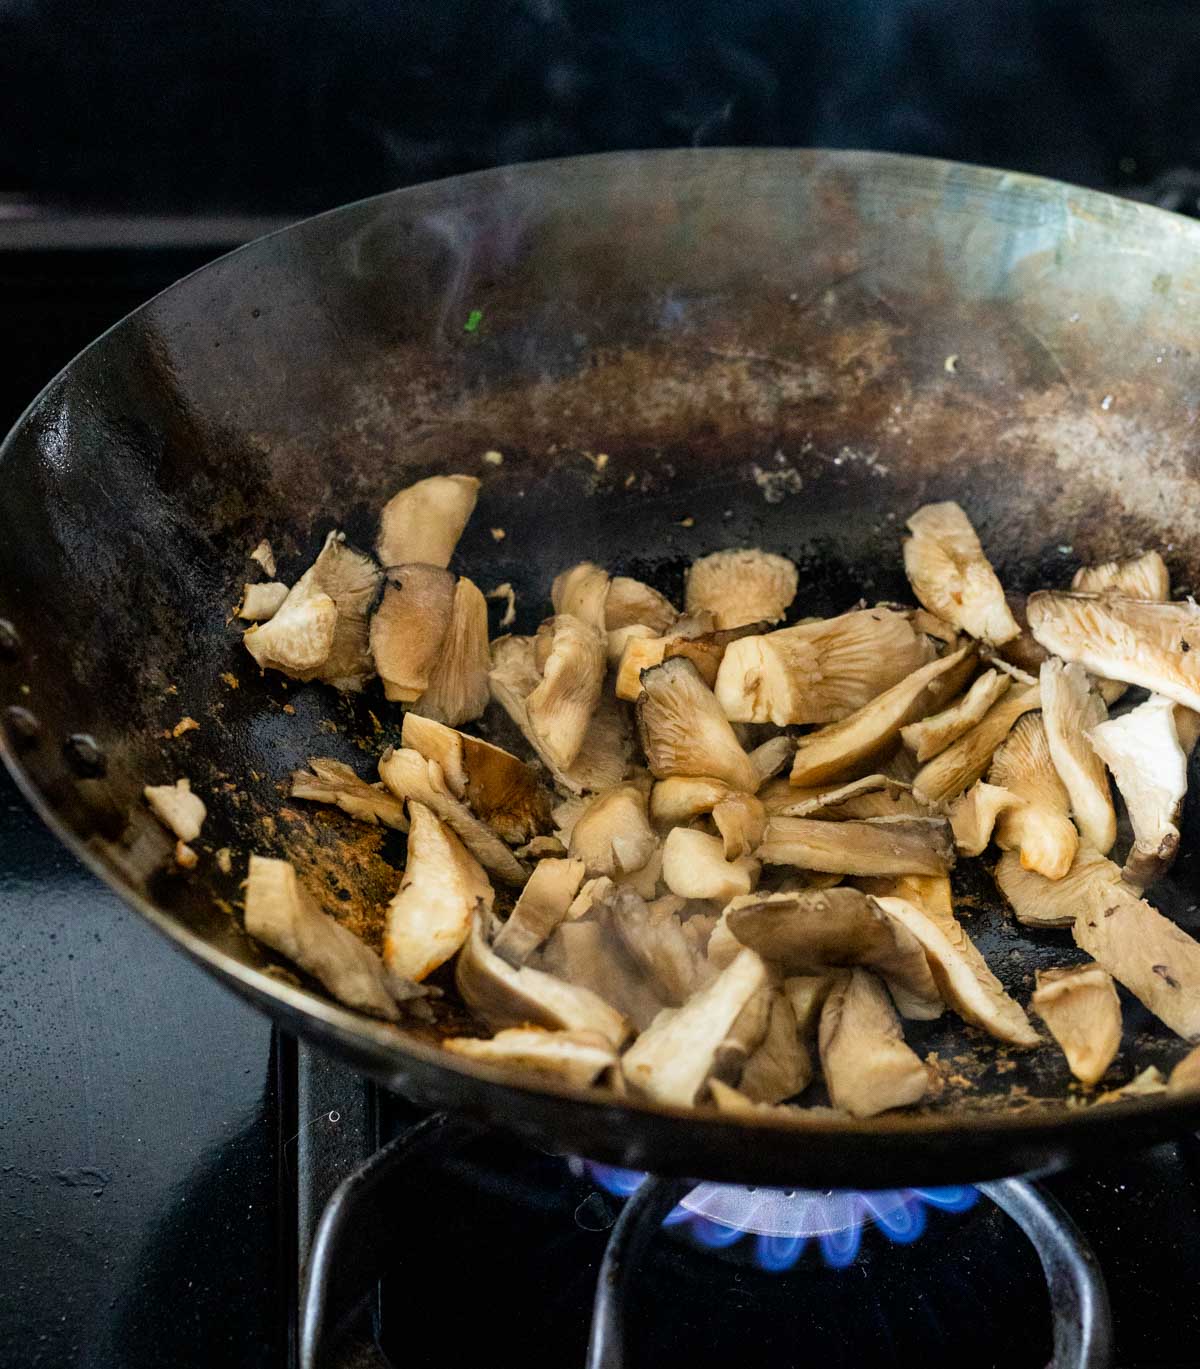 Mushrooms cooking in a wok on the stovetop.